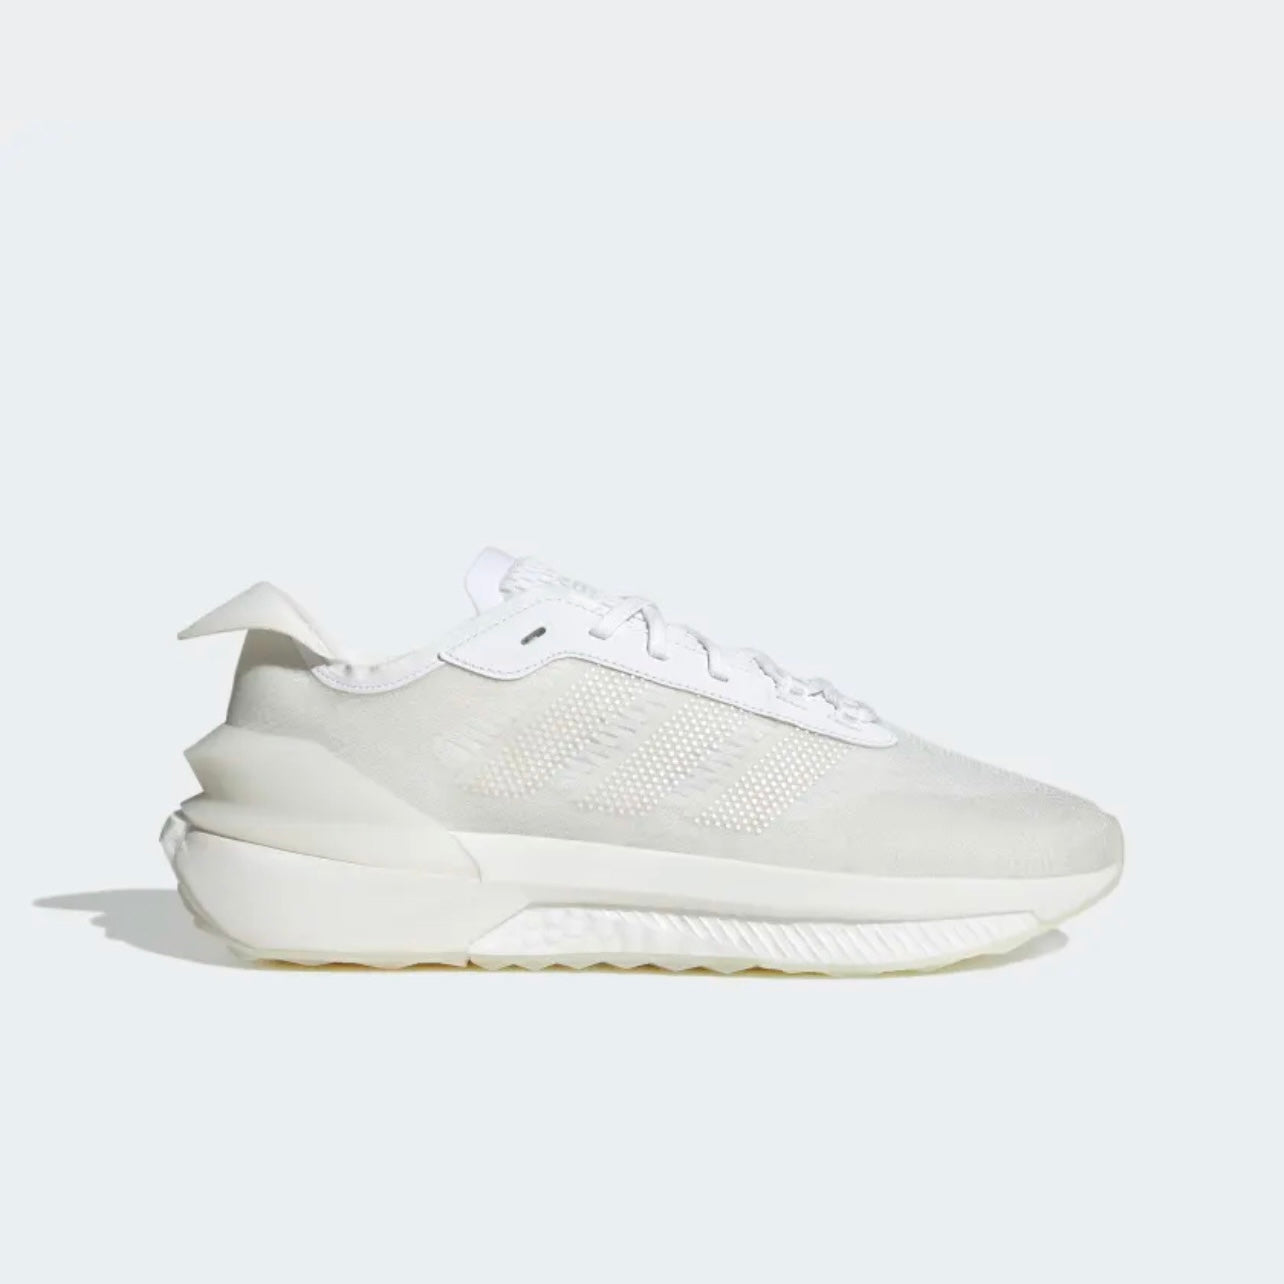 Adidas sneakers for men (HP5972)in white